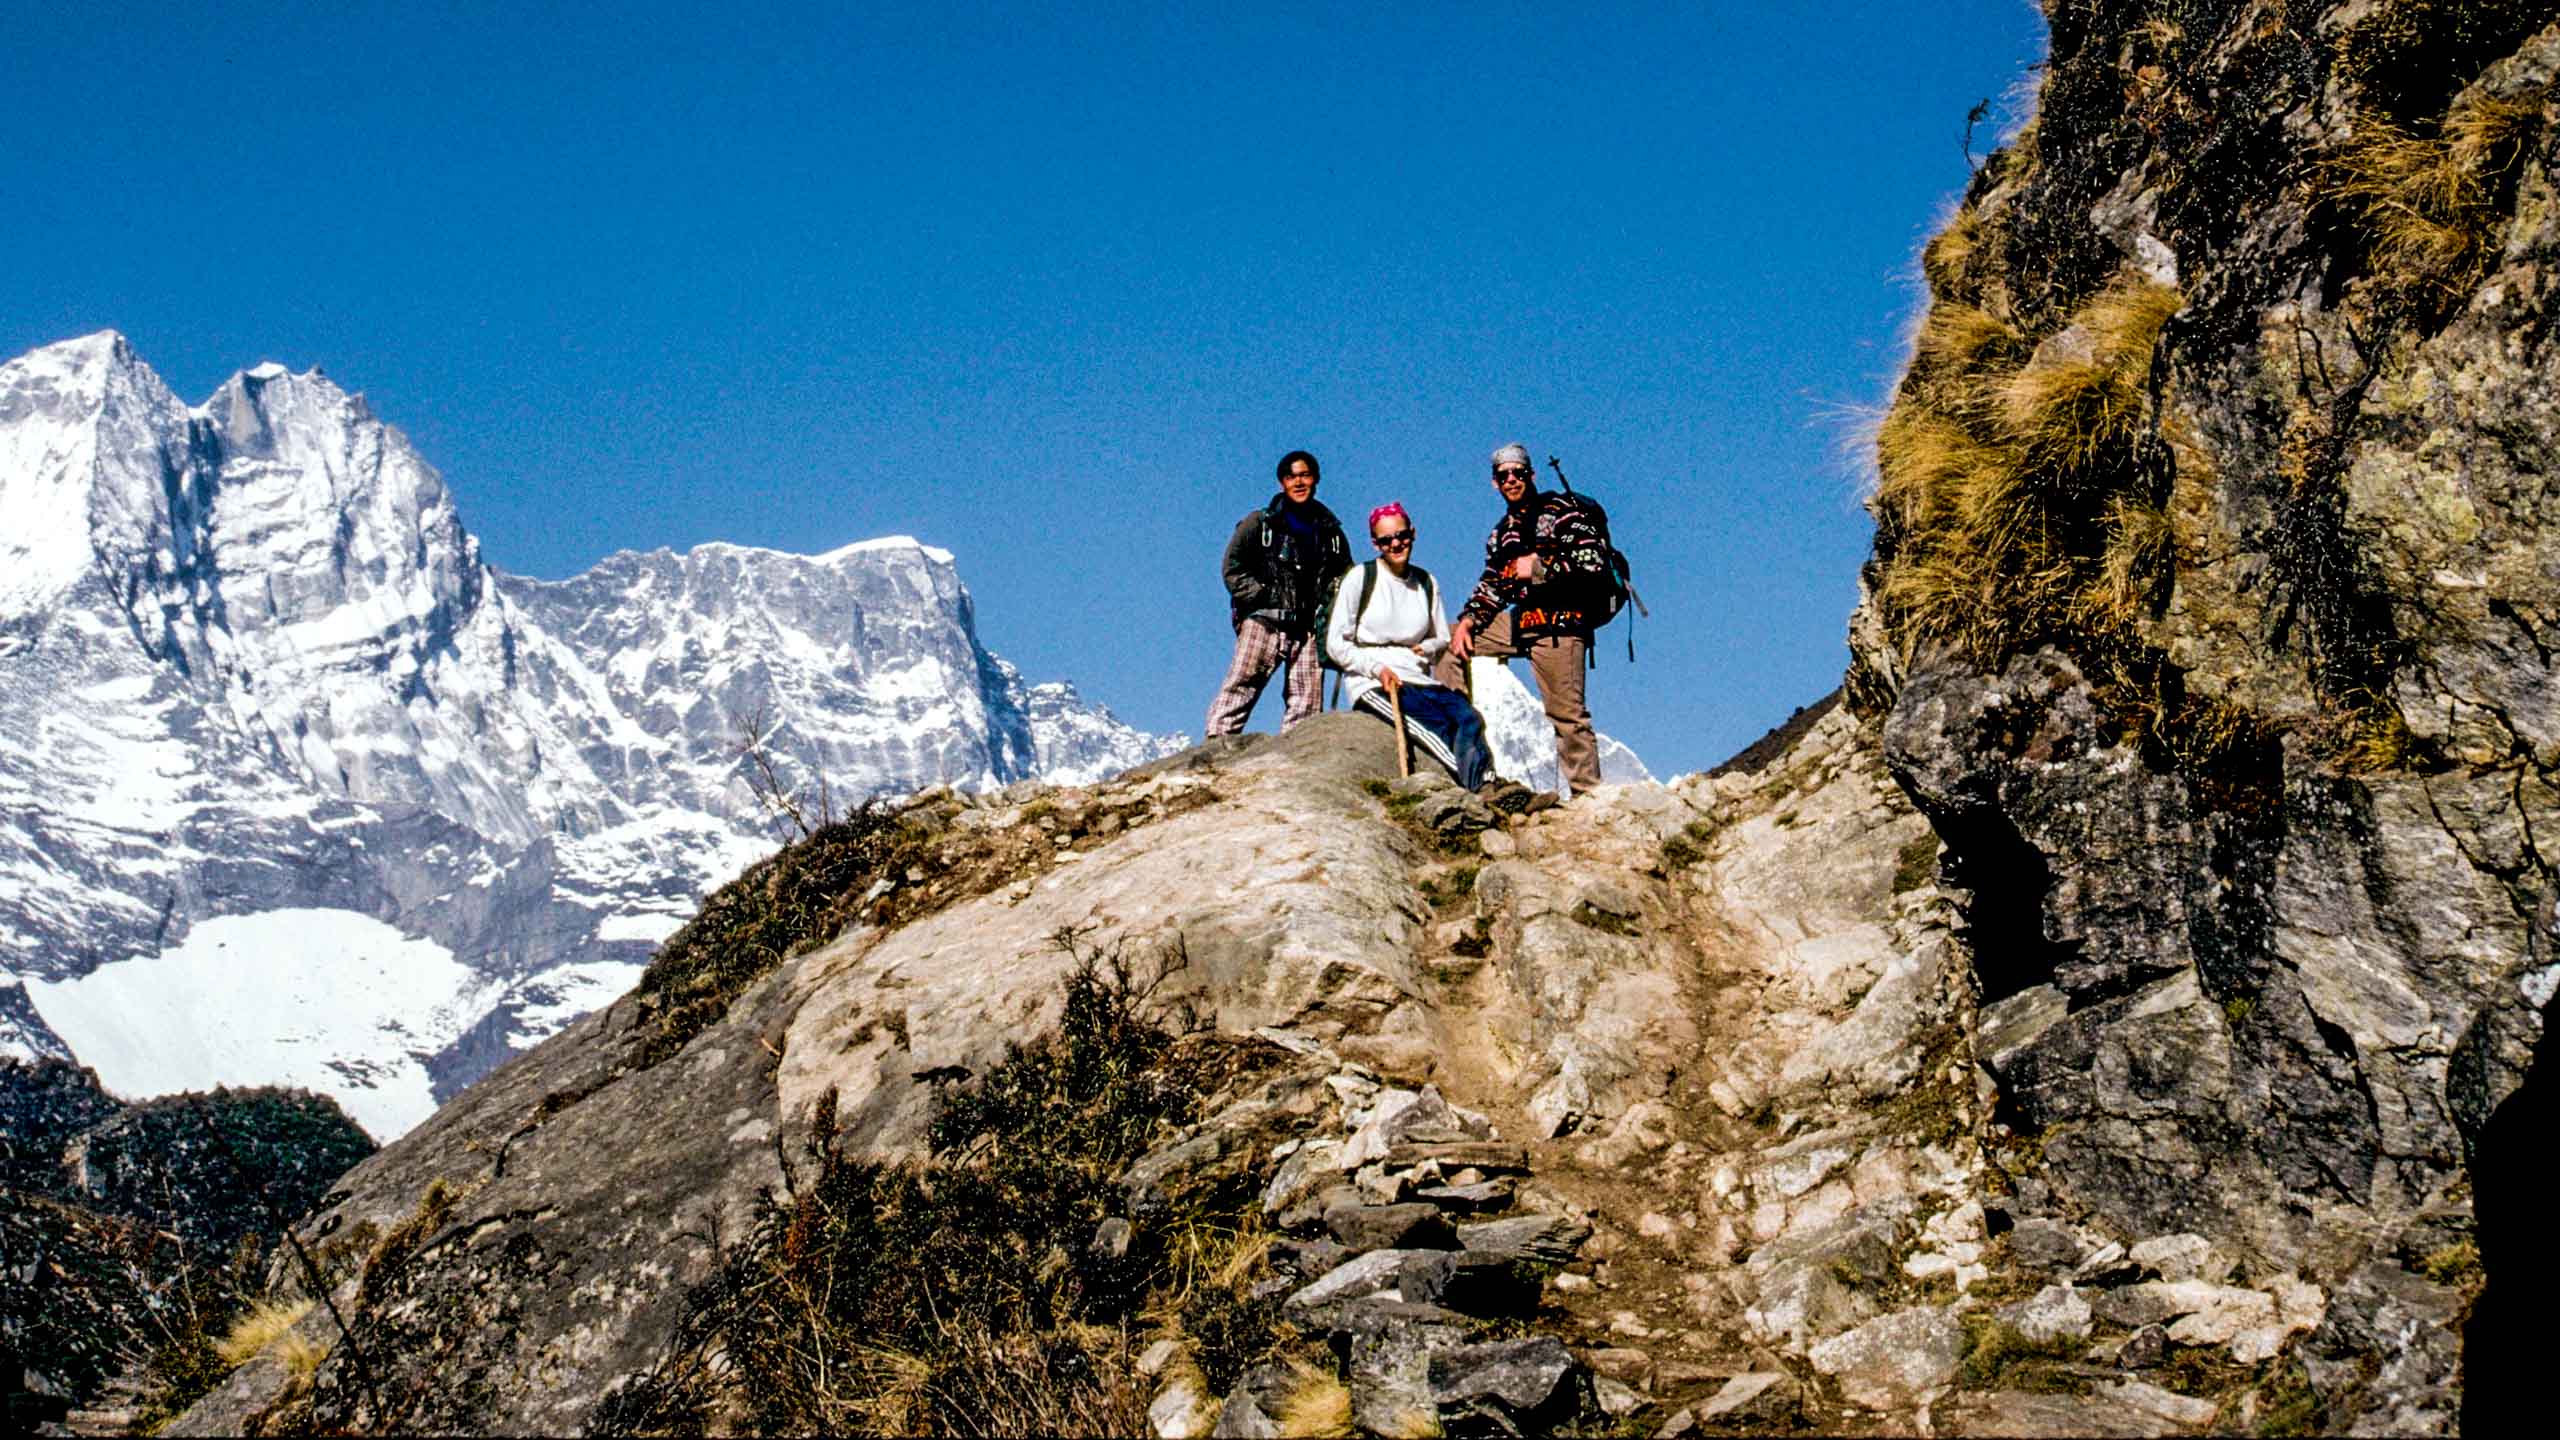 Everest hiking group rests on rock outcrop